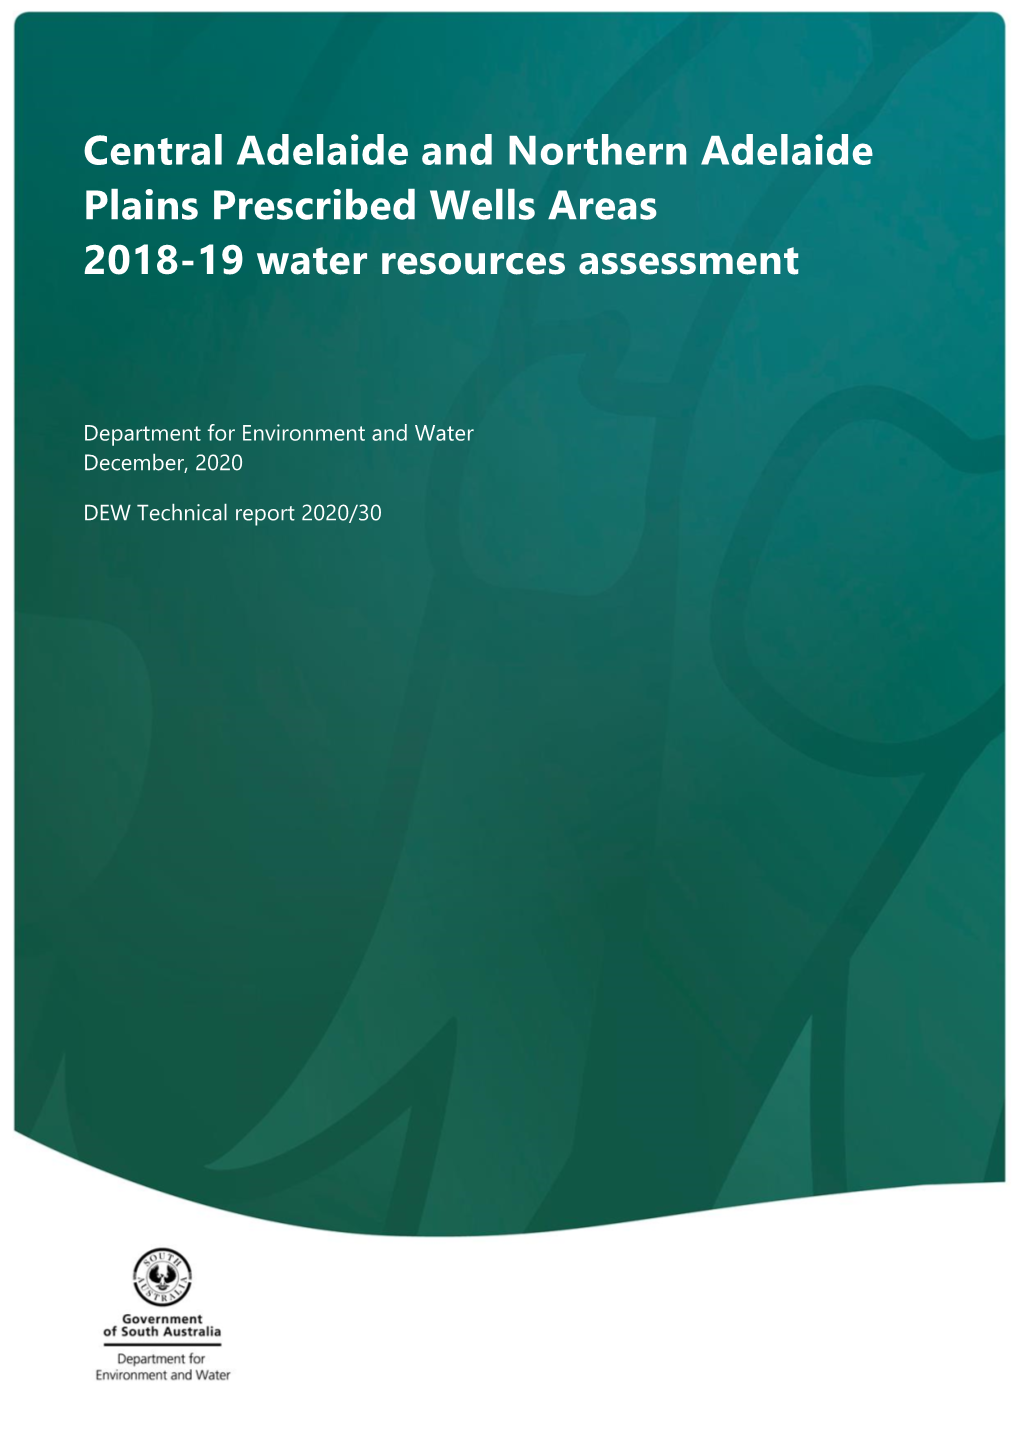 Central Adelaide and Northern Adelaide Plains Prescribed Wells Areas 2018-19 Water Resources Assessment